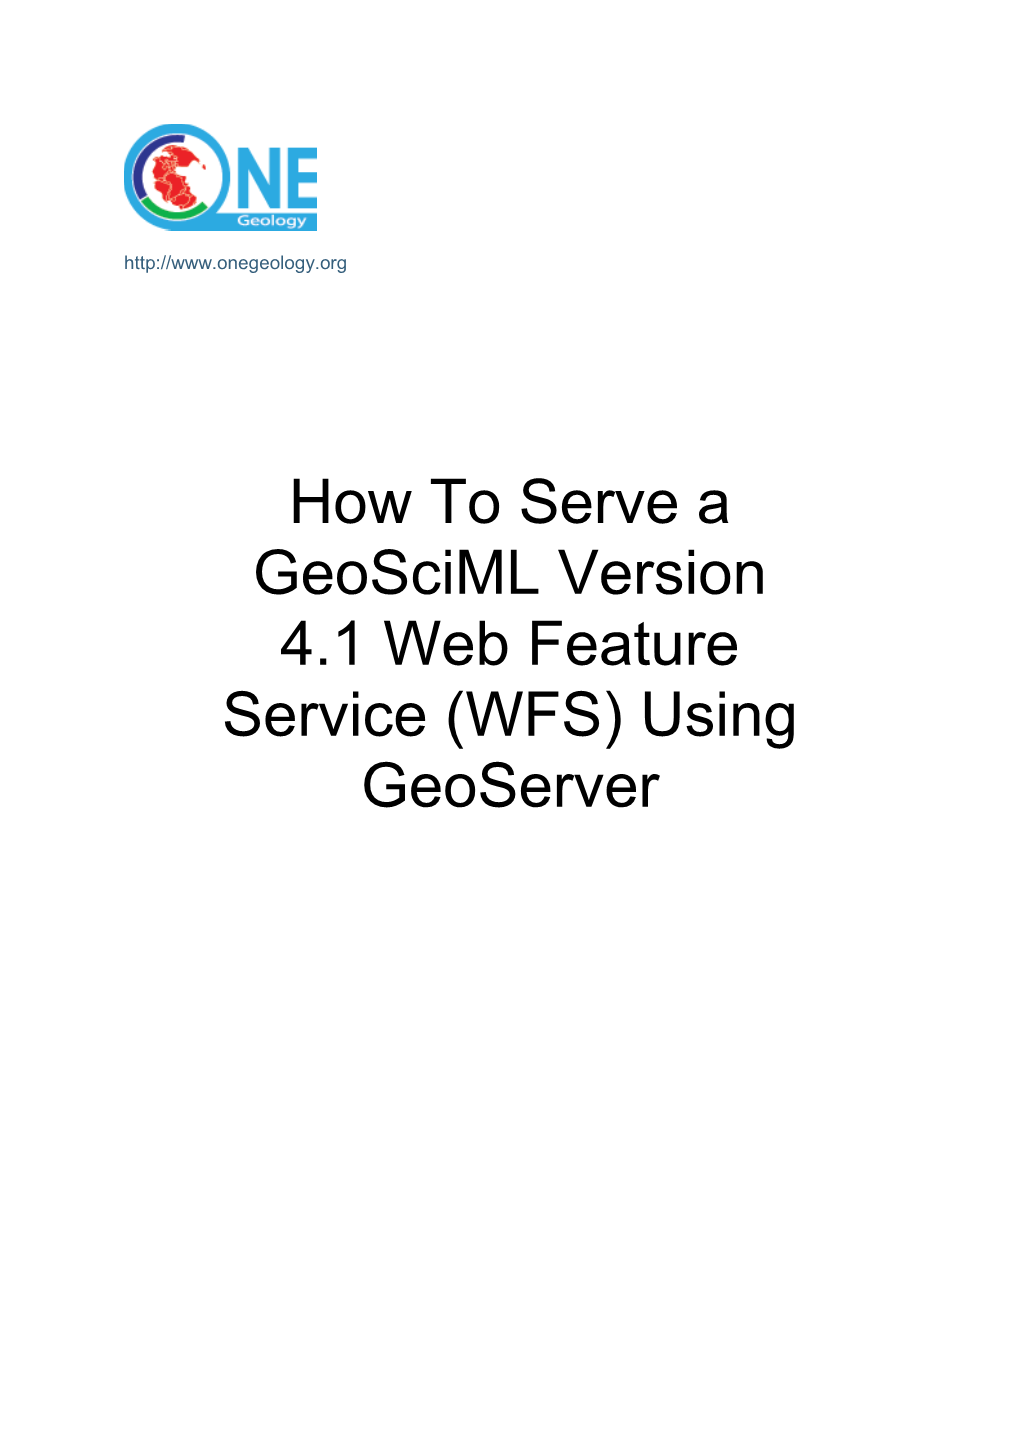 Implementing an INSPIRE Web Feature Service with Geoserver